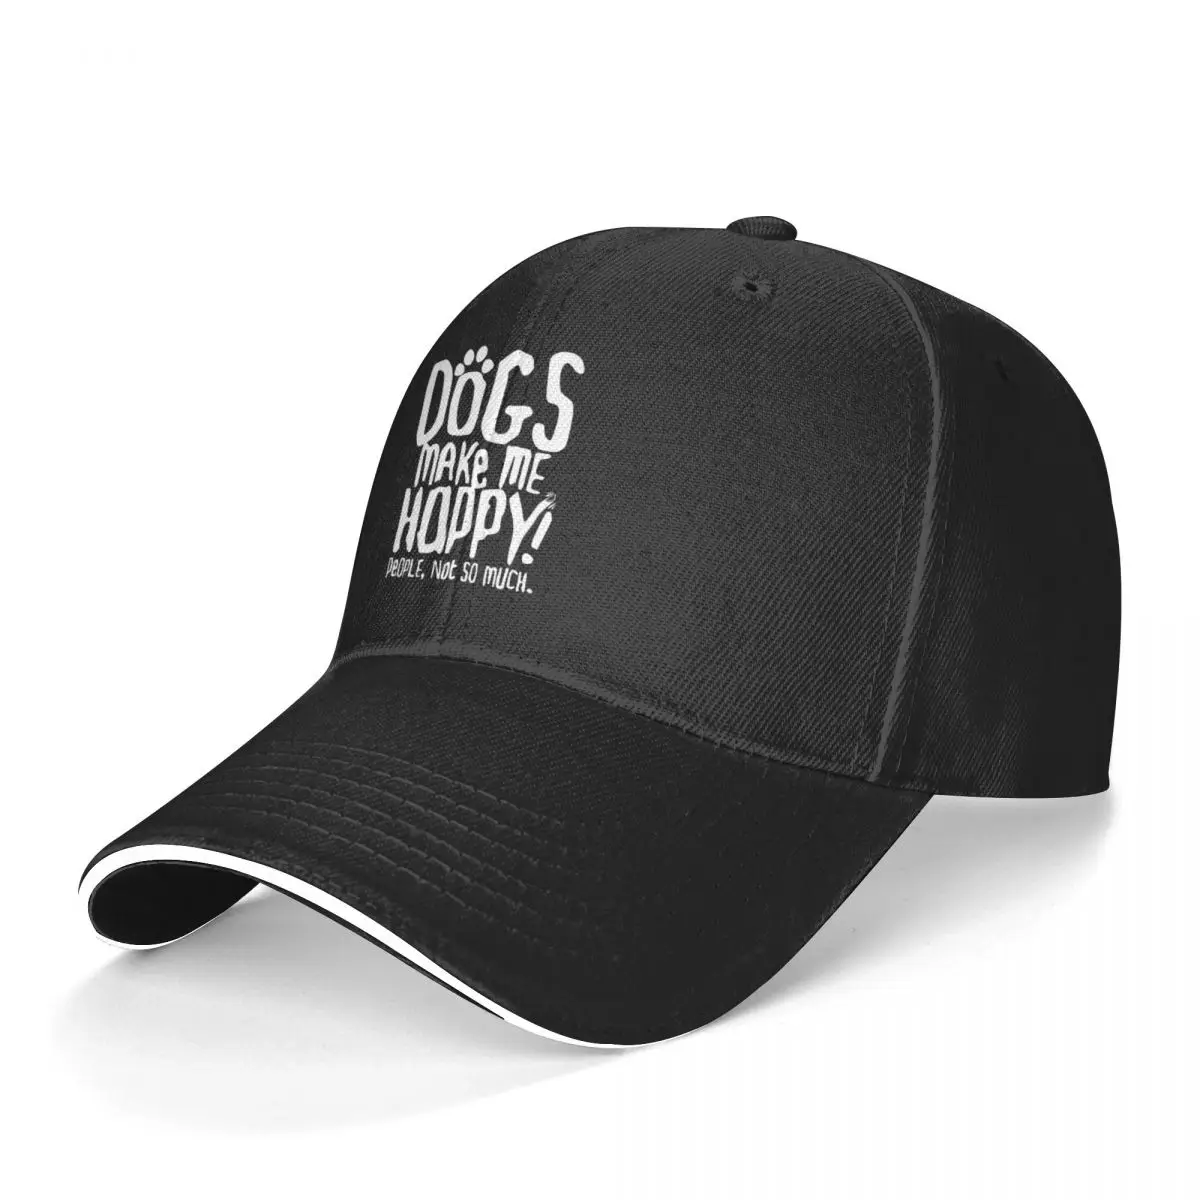 Rescue Dog Baseball Cap Dogs Make Me Happy People Not So Much Kpop Hip Hop Hats Breathable Female Vintage Printed Baseball Caps